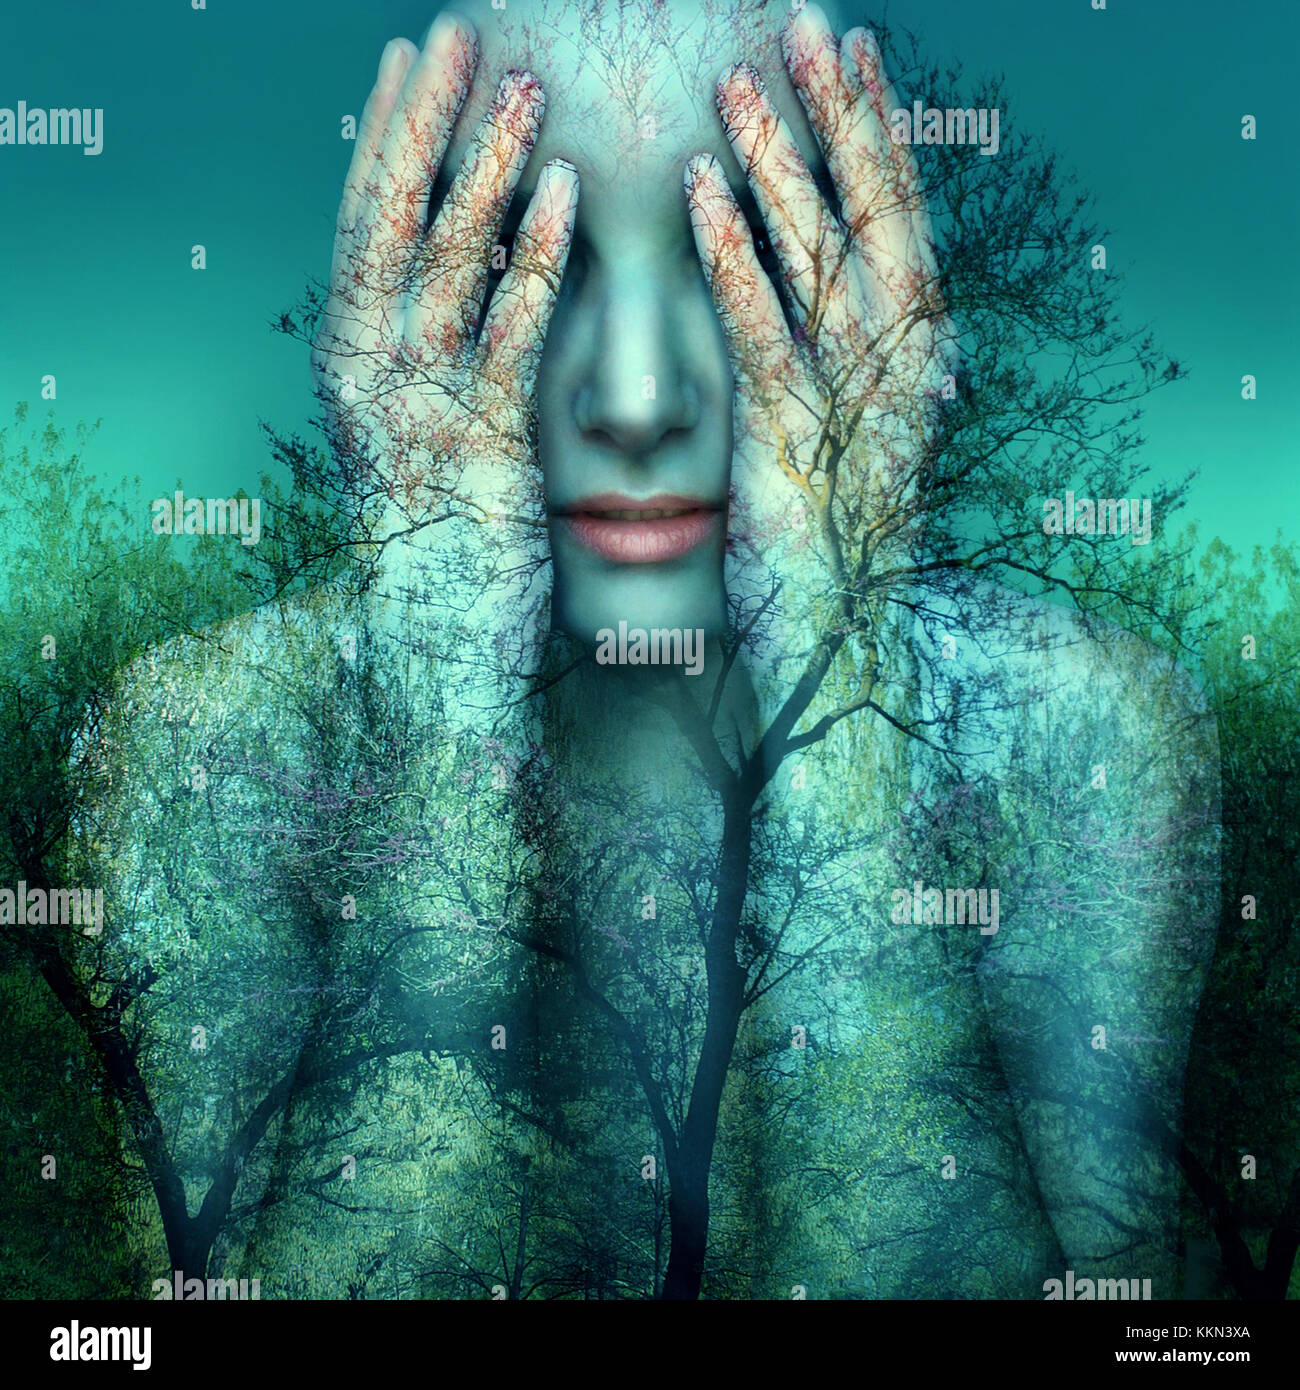 Surreal and artistic image of a girl who covers her eyes with her hands on a background of trees and sky Stock Photo